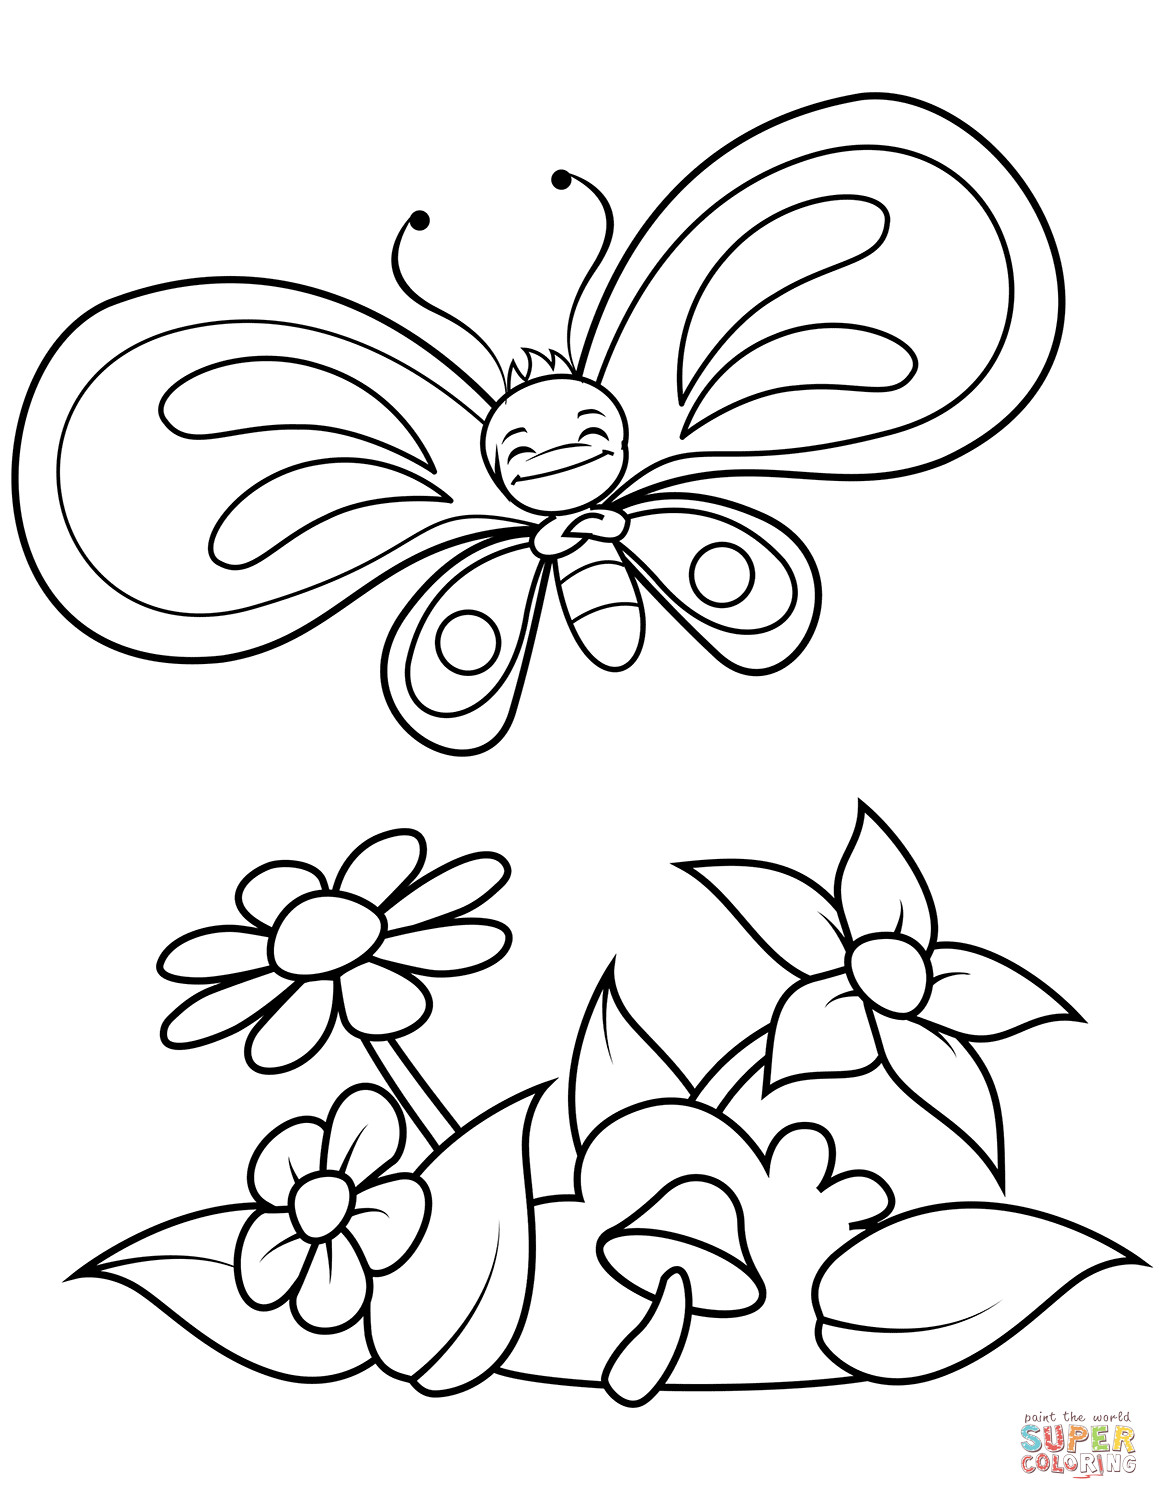 Butterfly Coloring Pages For Boys
 Funny Butterfly Boy Flies over Flowers and Mushroom